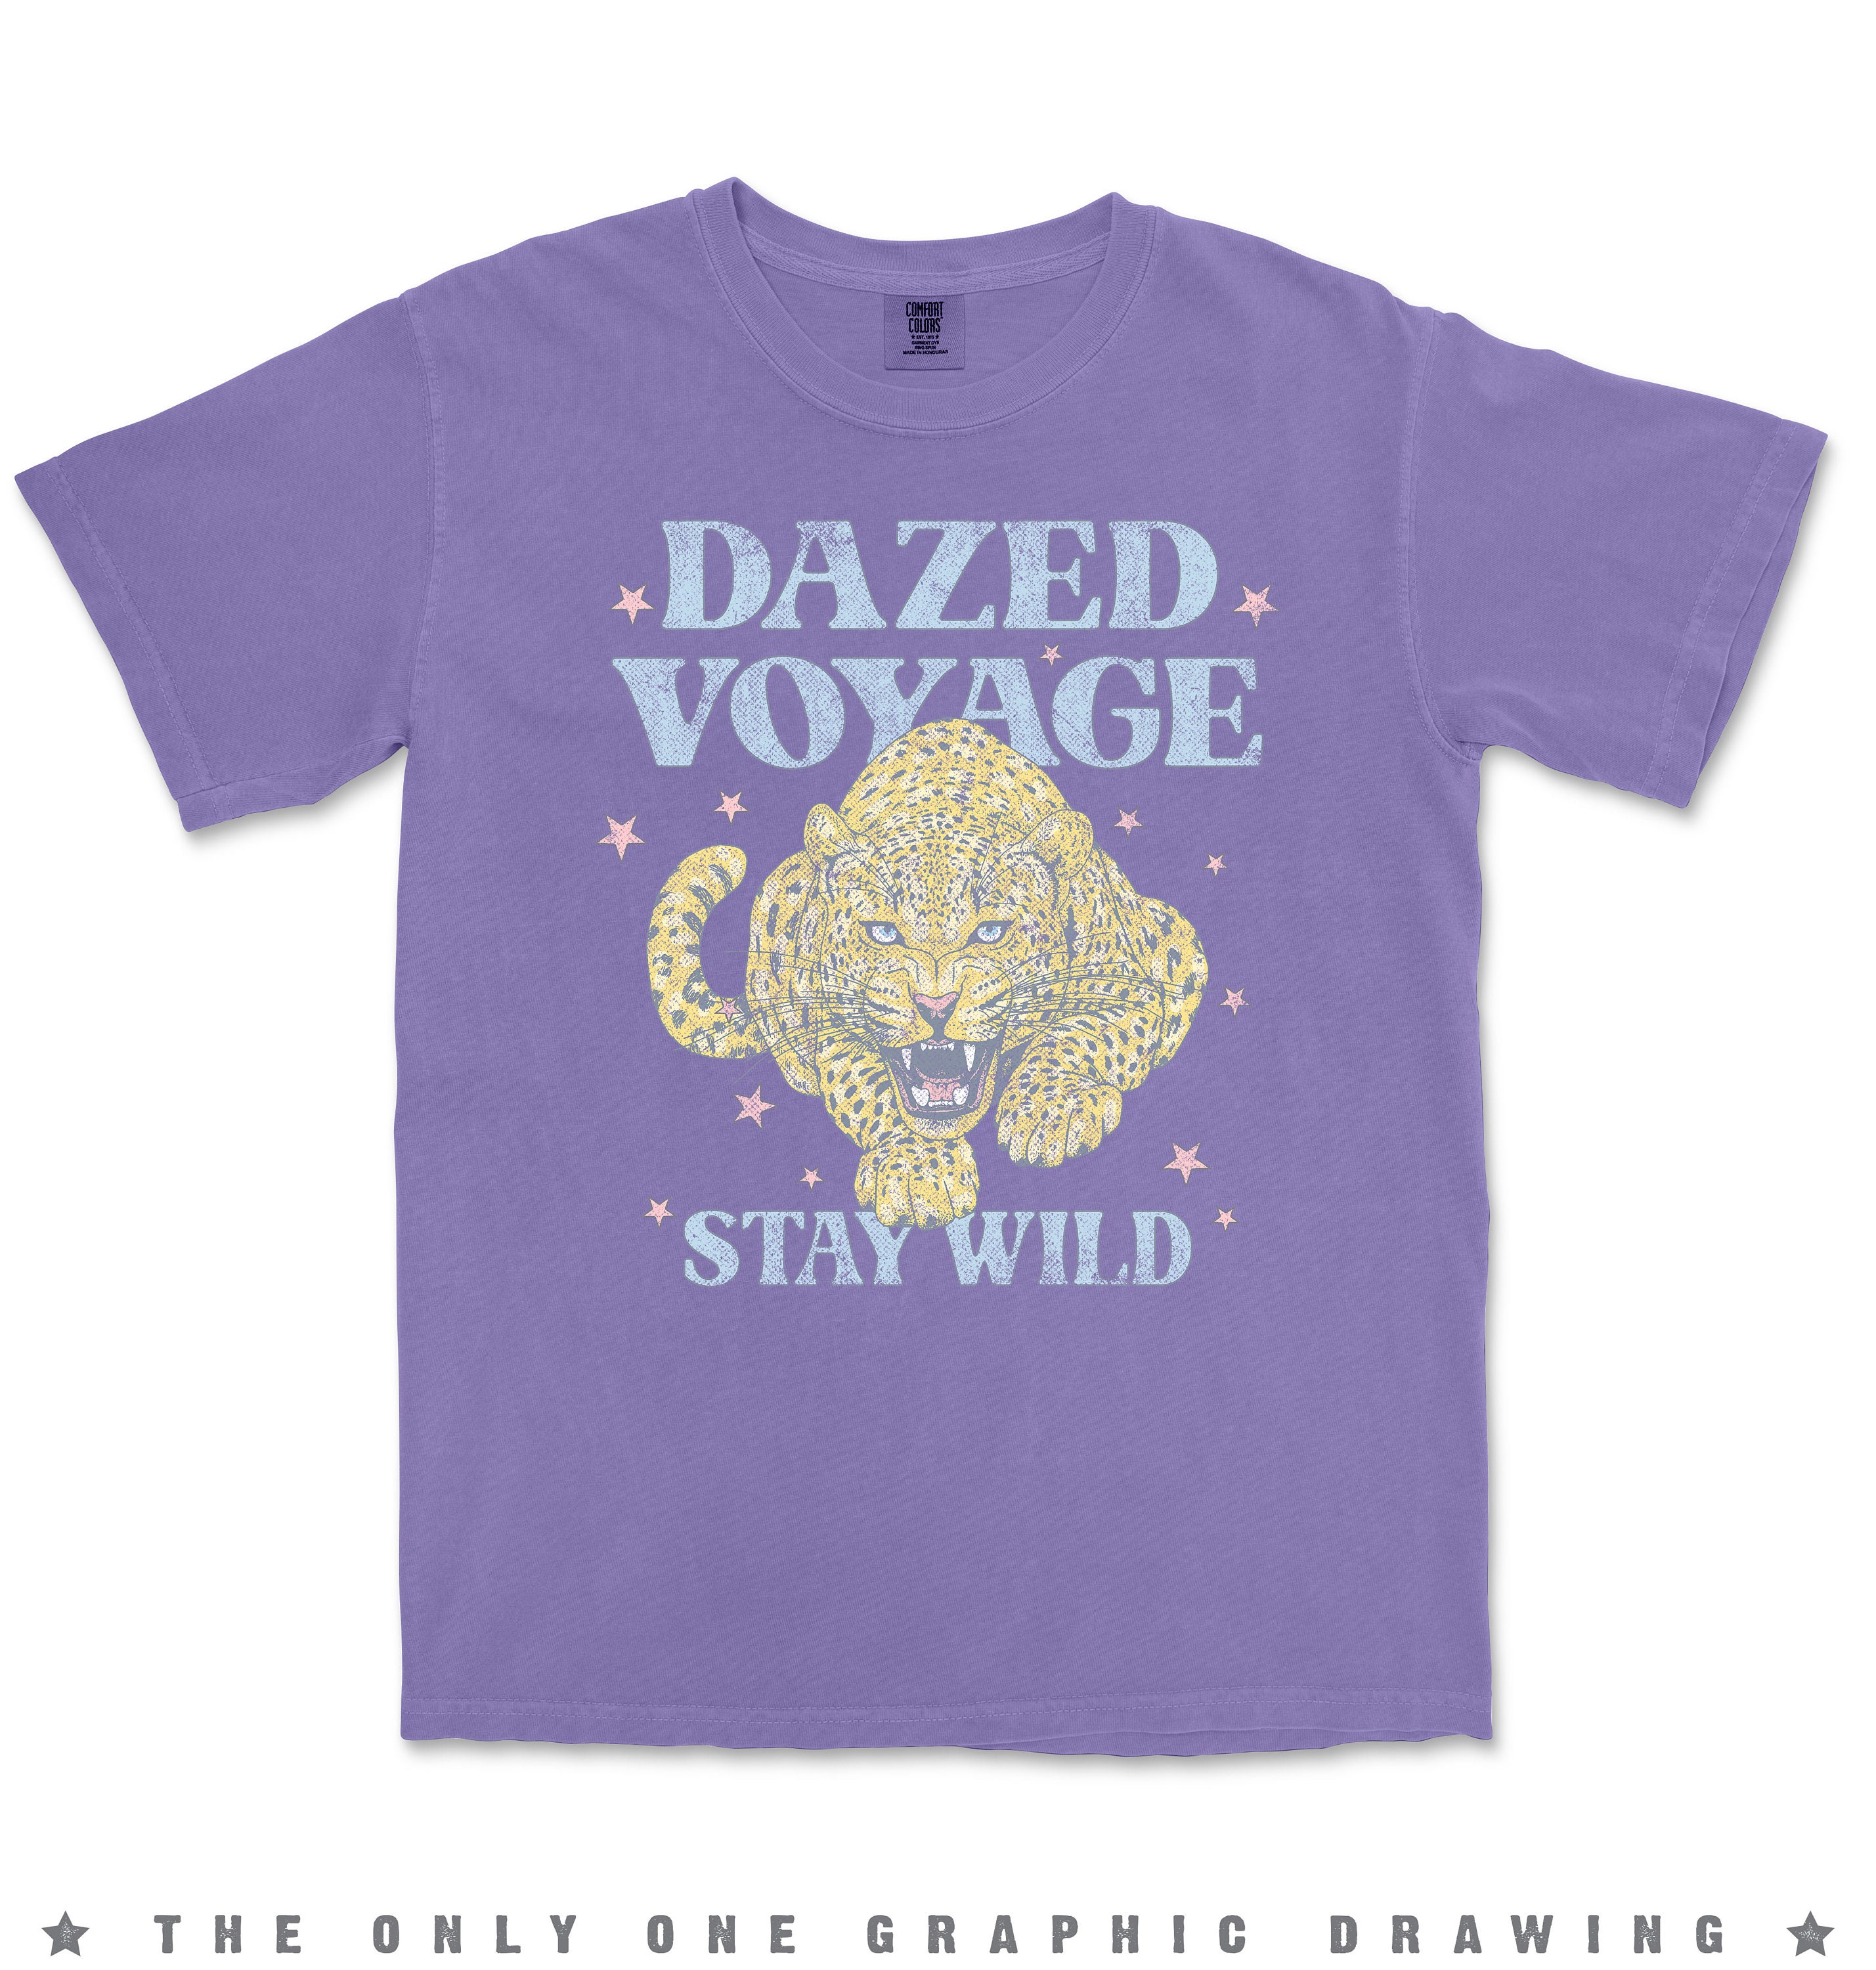 Discover Dazed Voyage Tee, Dazed Voyage T-Shirts, Leopard Tee, Stay Wild T-shits, Vintage Inspired Cotton T-shirt, Unisex Tee, Comfort Colors T-shirt